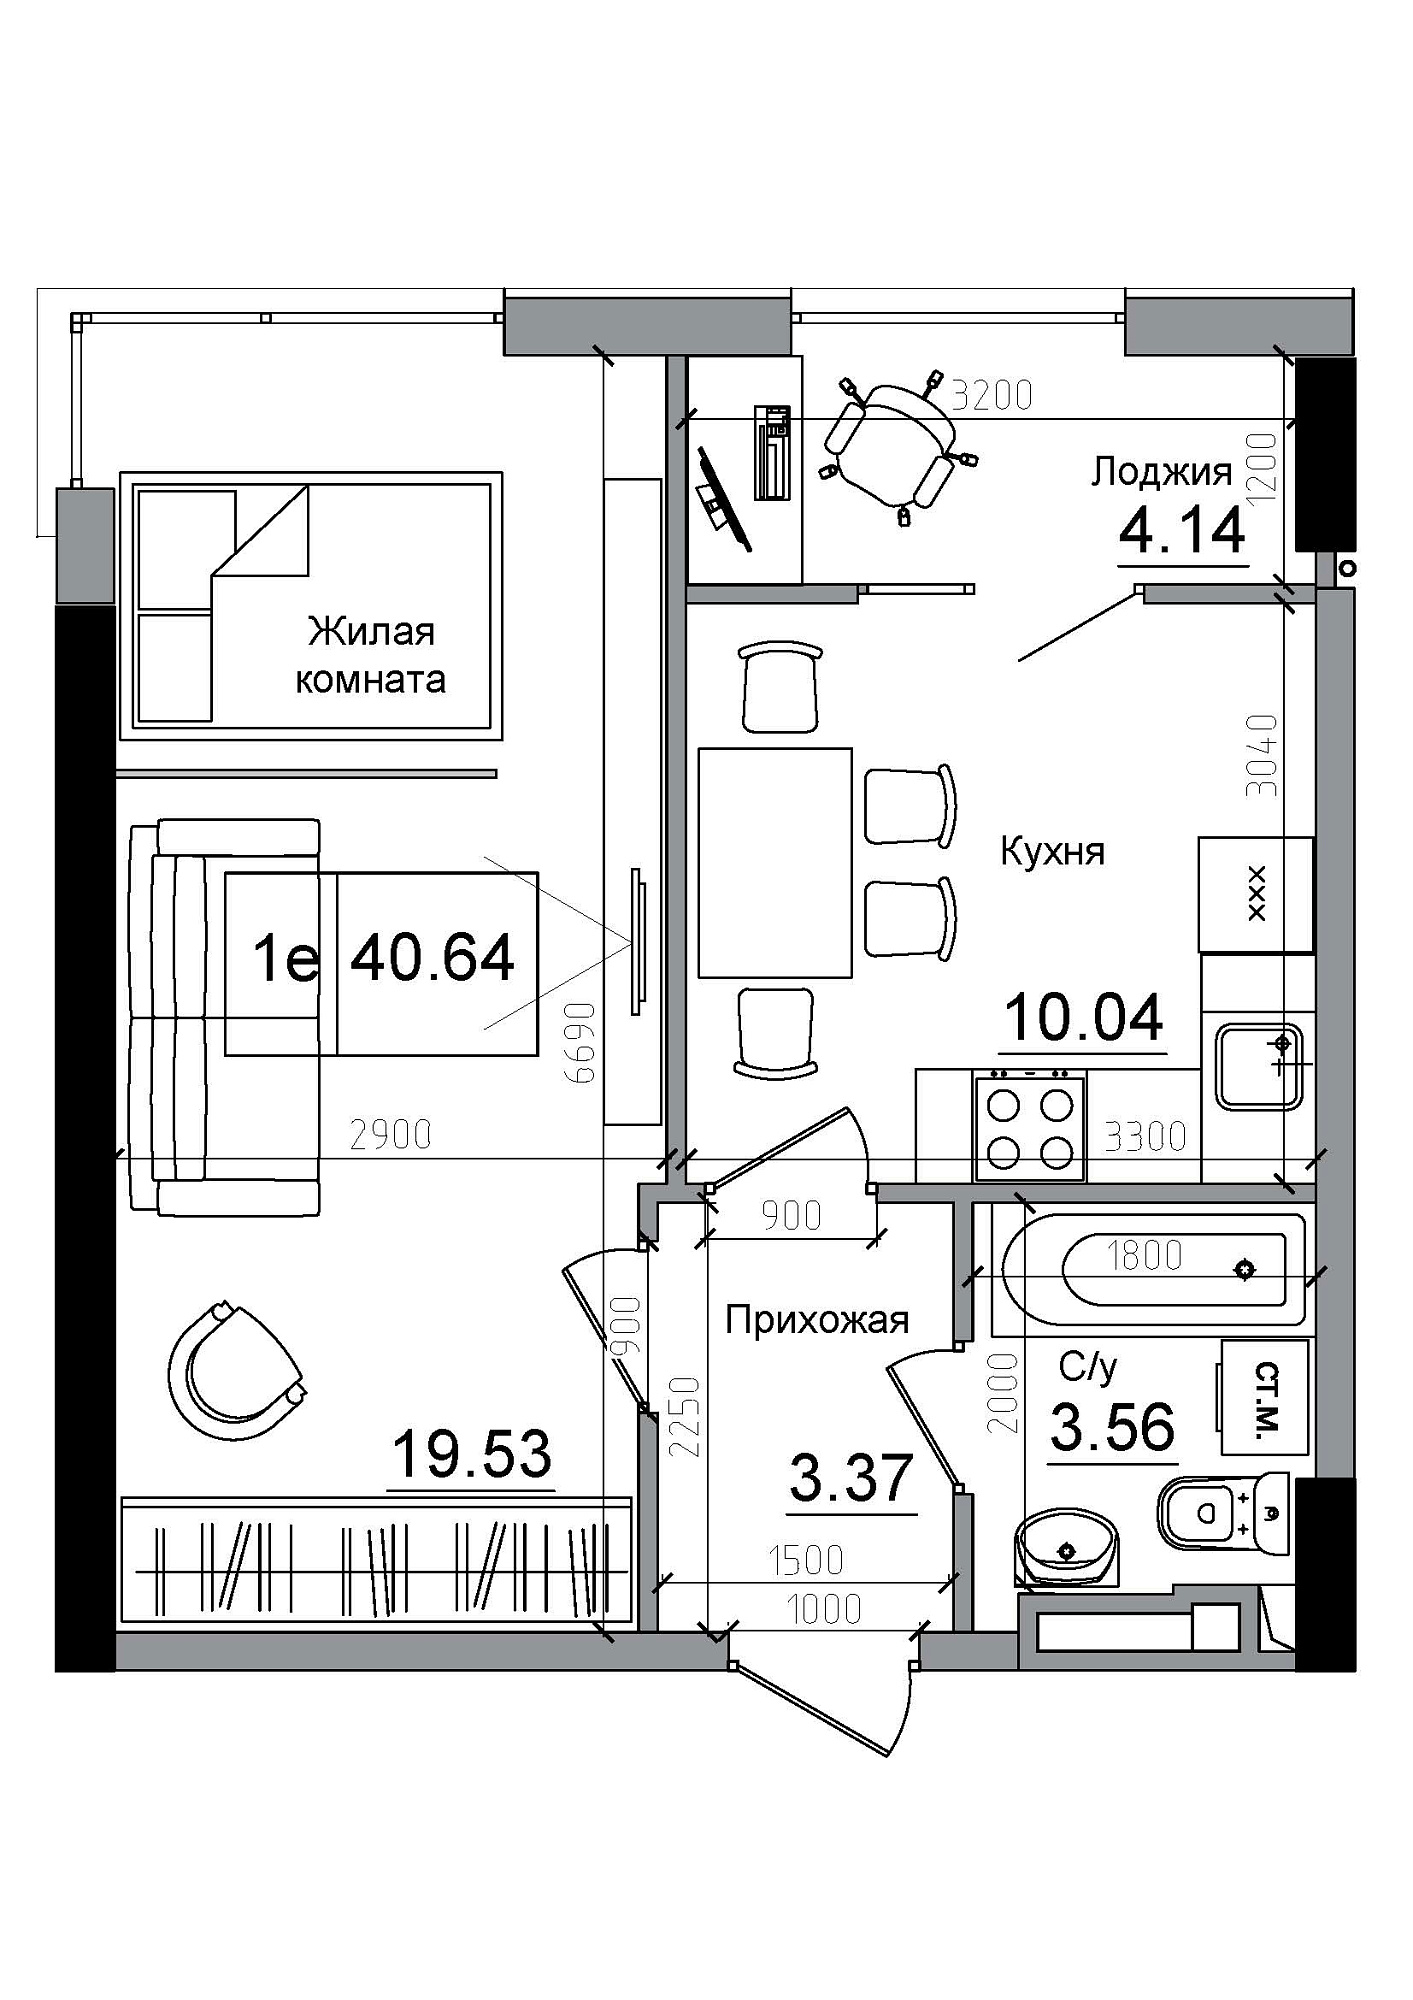 Planning 1-rm flats area 40.64m2, AB-12-04/00006.